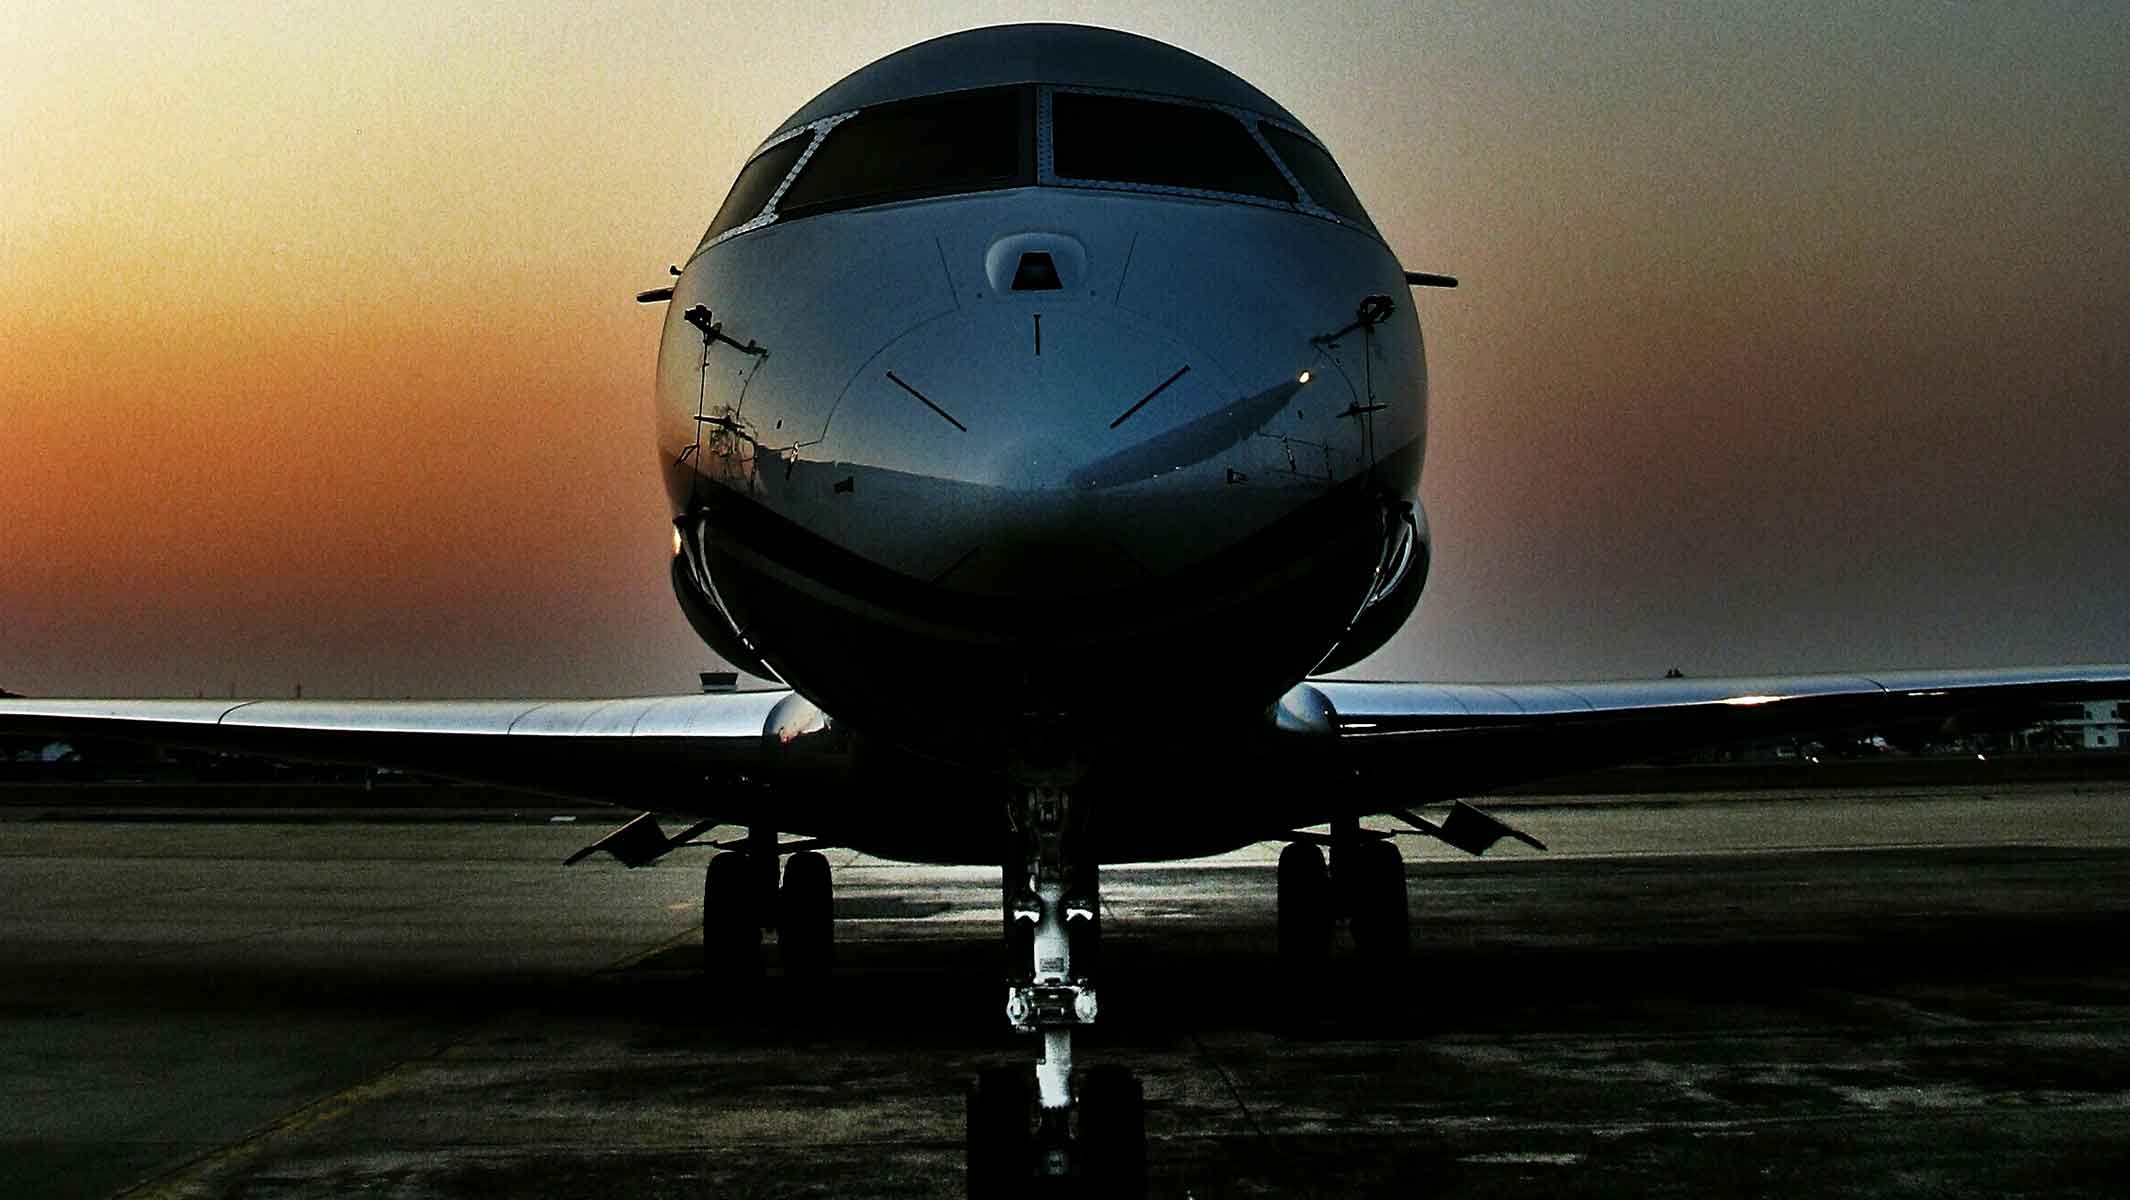 SLJ - Starr Luxury Jets, Live the Platinum -Hire a Private Jet Experience -Girona Costa Brava Airport, - Book your Private Jet in UK, Mayfair, Berkeley Square